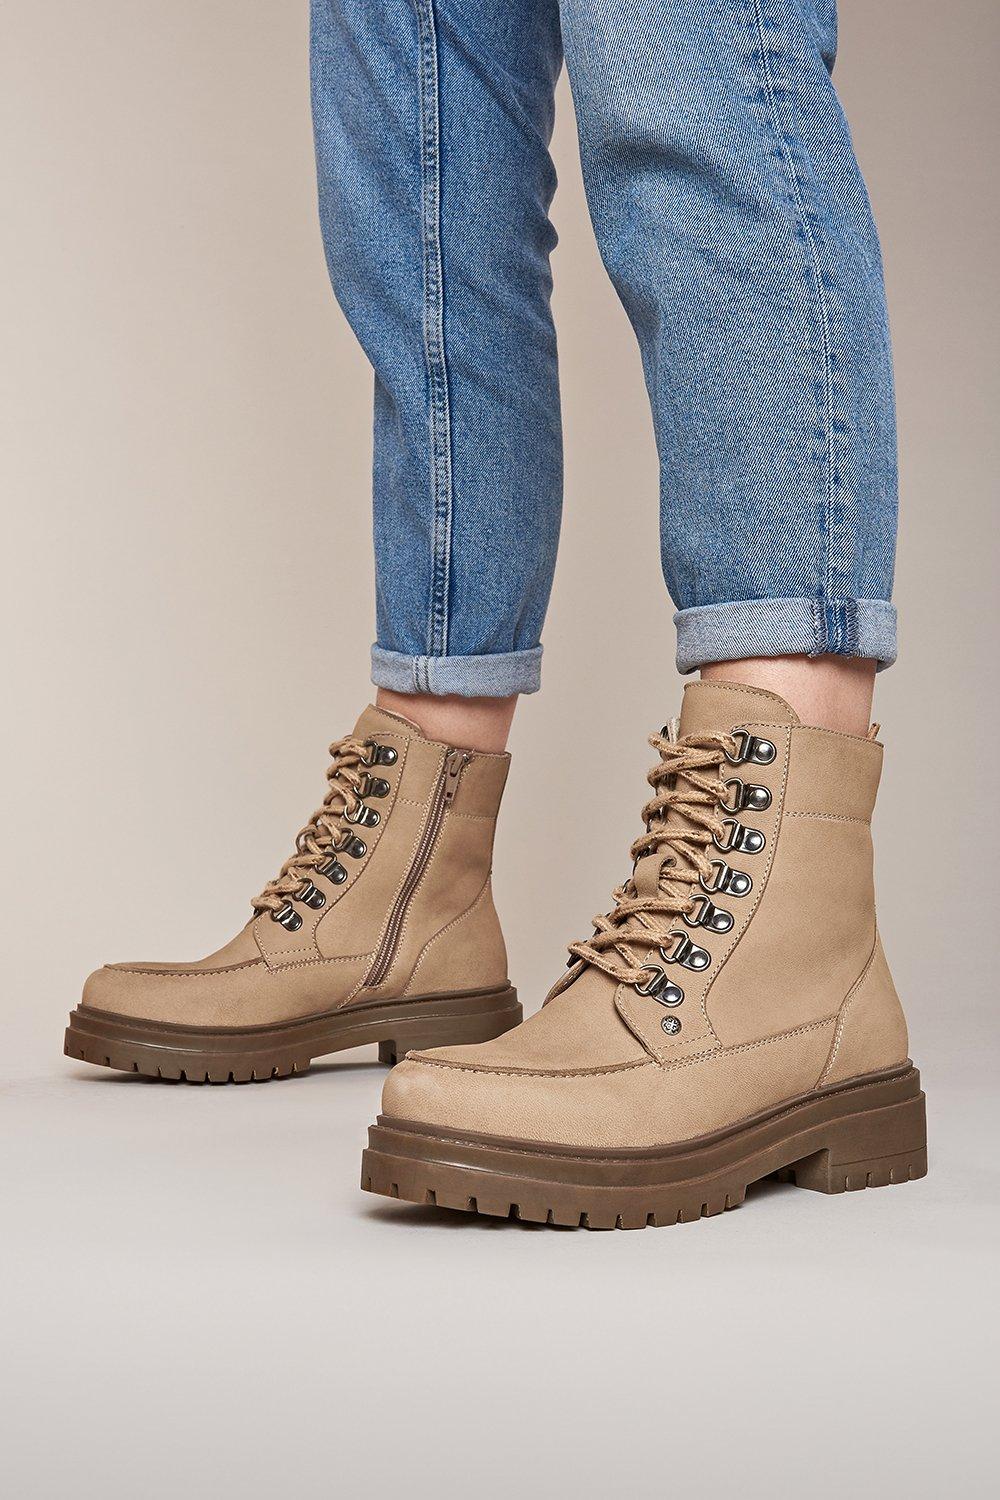 'Forrer'  Combat-Style Lace Up Boots